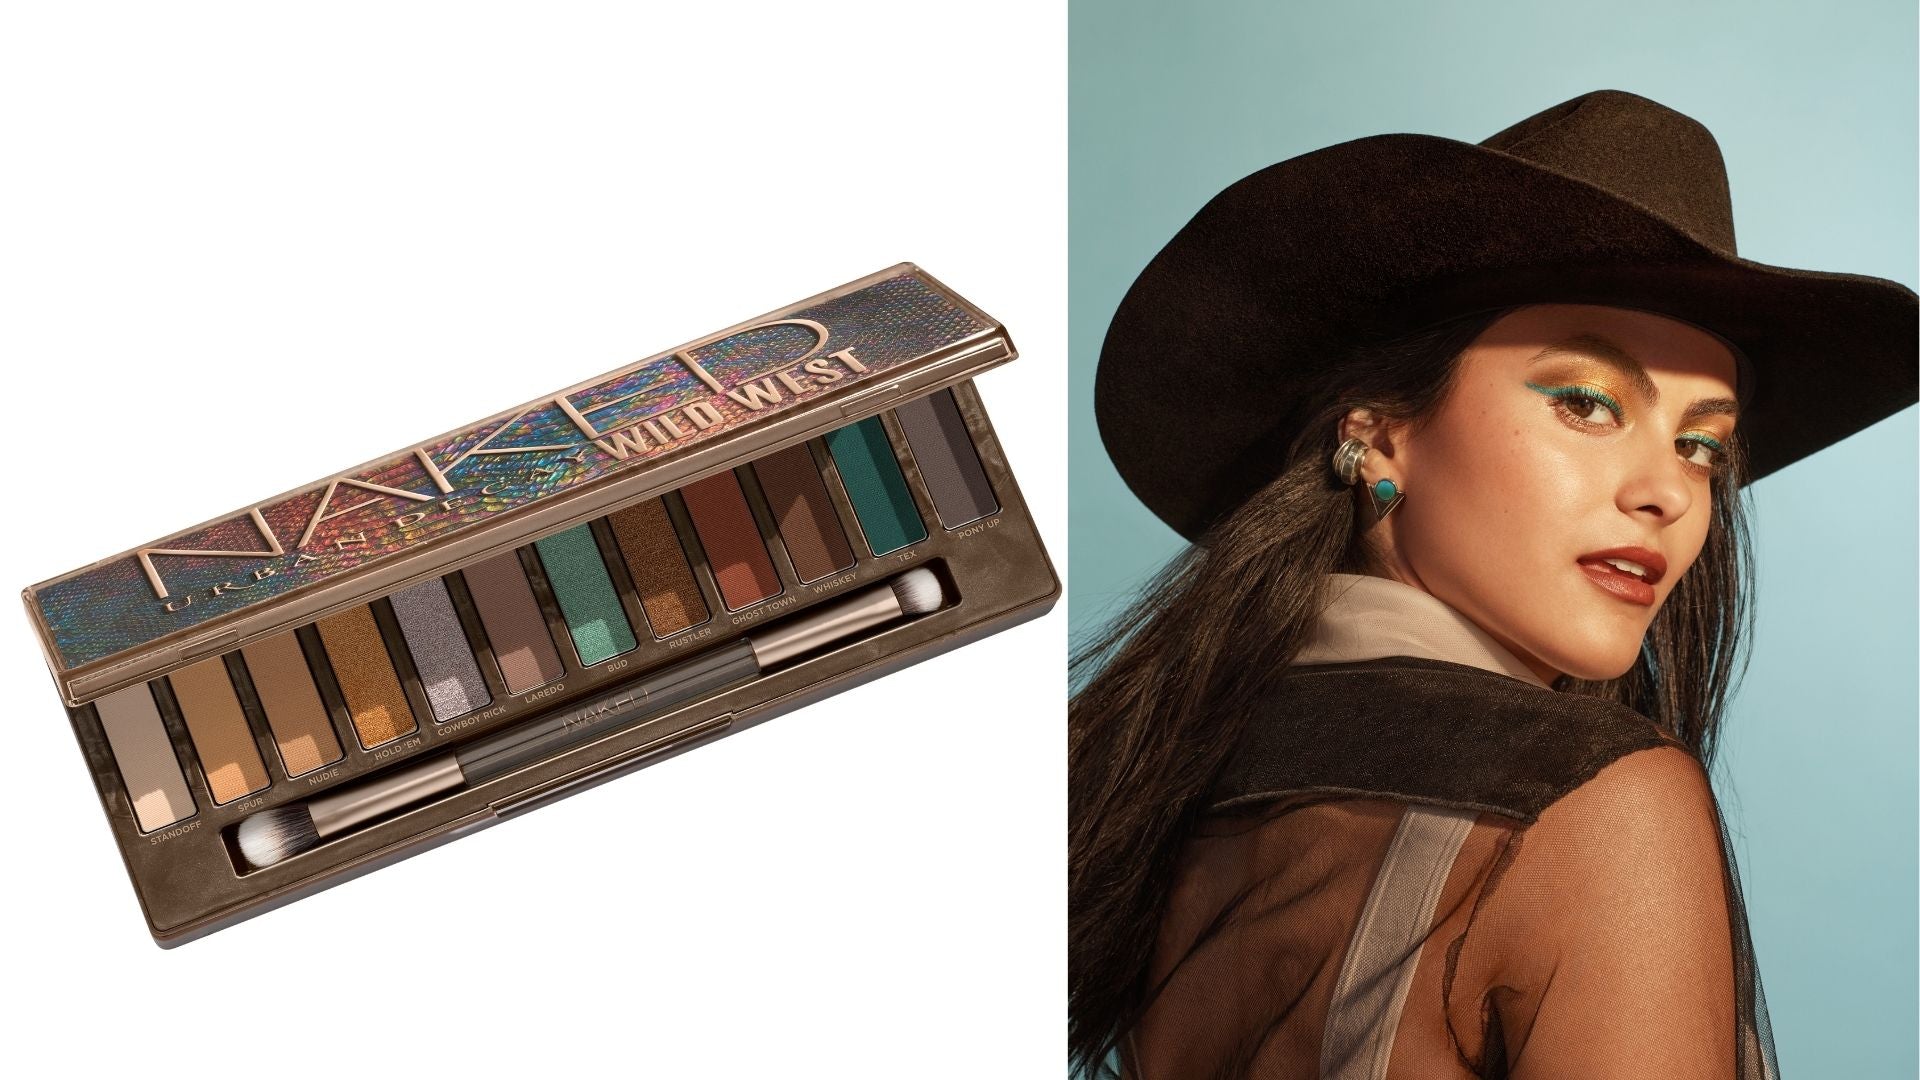 review, photos, trends, swatches, makeup, ingredients, 2021, 2022, urban decay, wild west palette, eyeshadow palette, vegan makeup, best vegan makeup, best new eyeshadow palettes